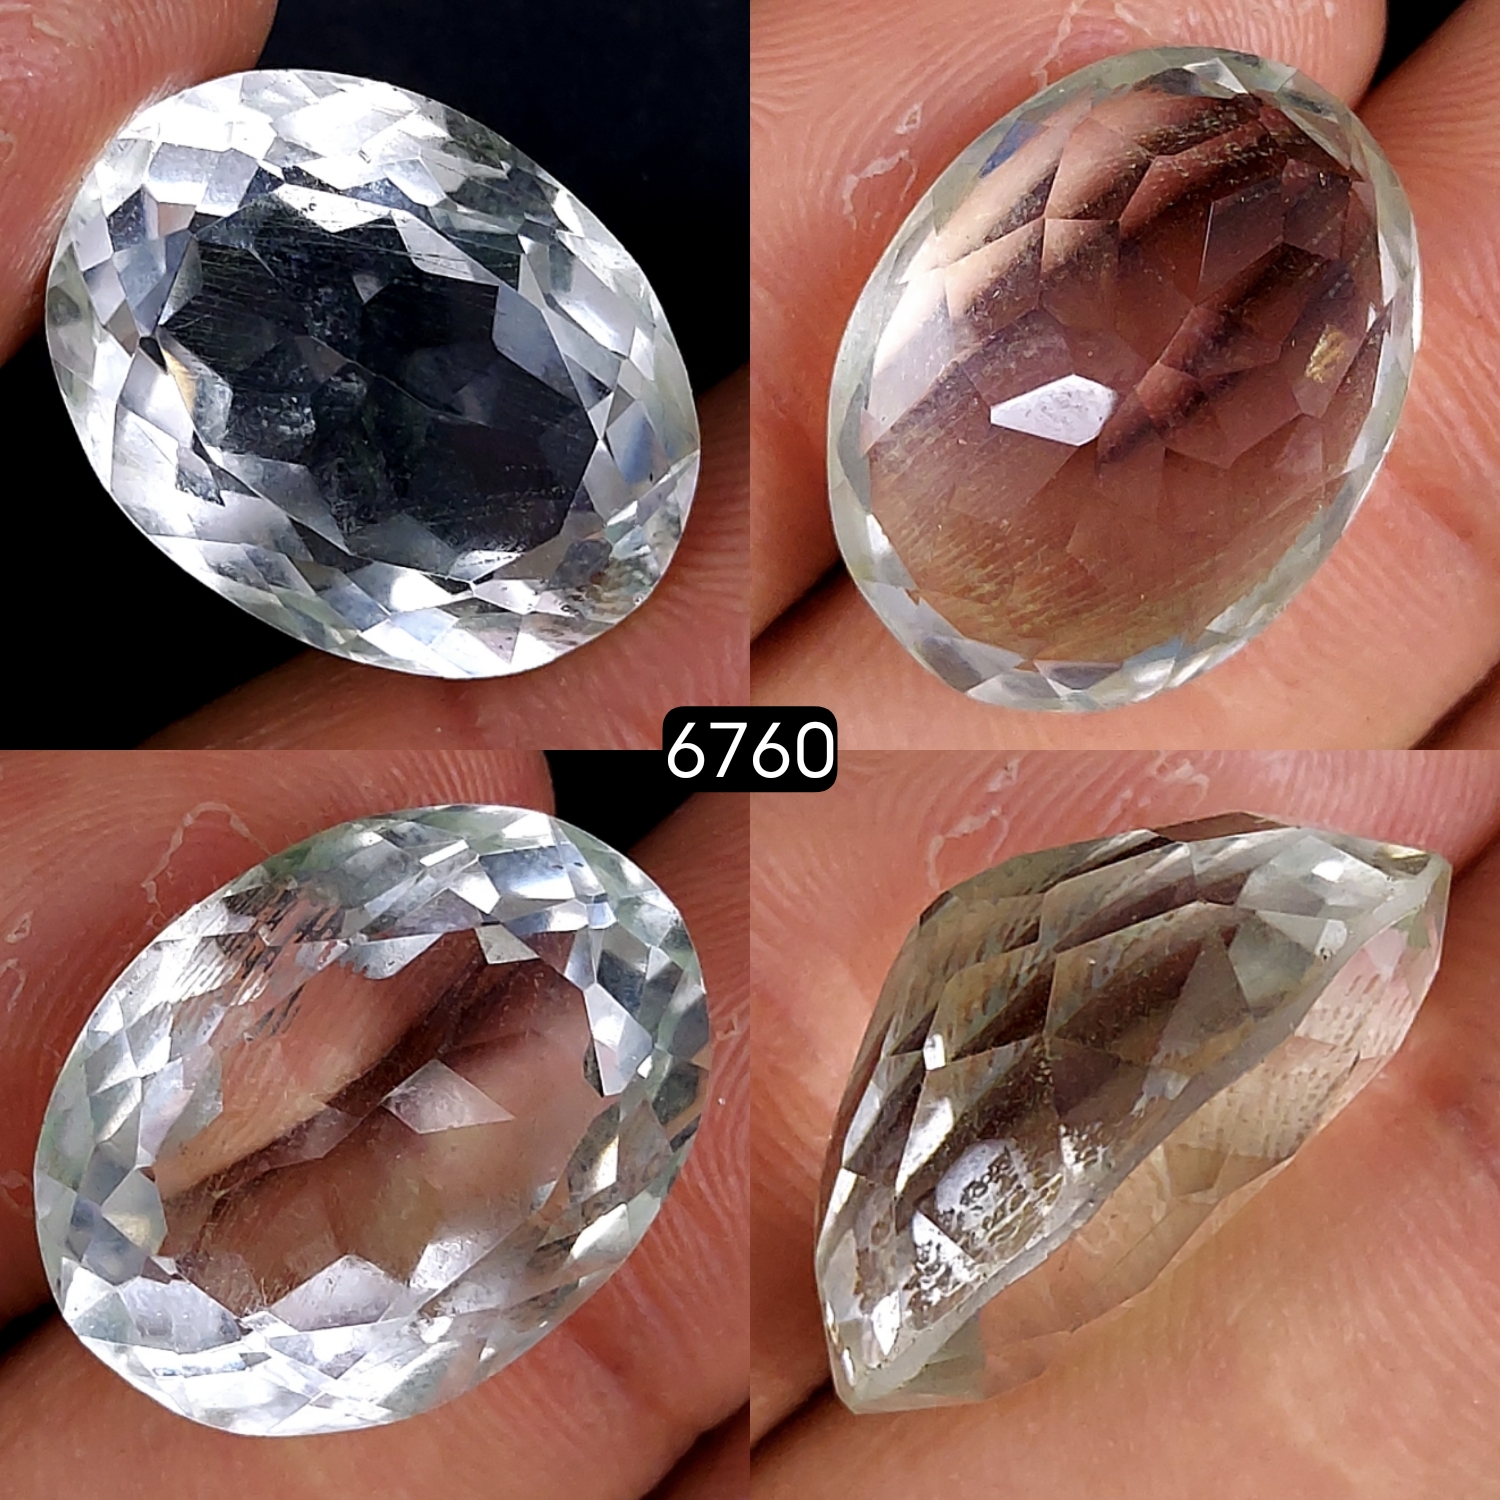 1Pc 25Cts Natural Crystal Quartz Faceted Cabochon Gemstone Oval Shape Crystal 20x15mm#6760